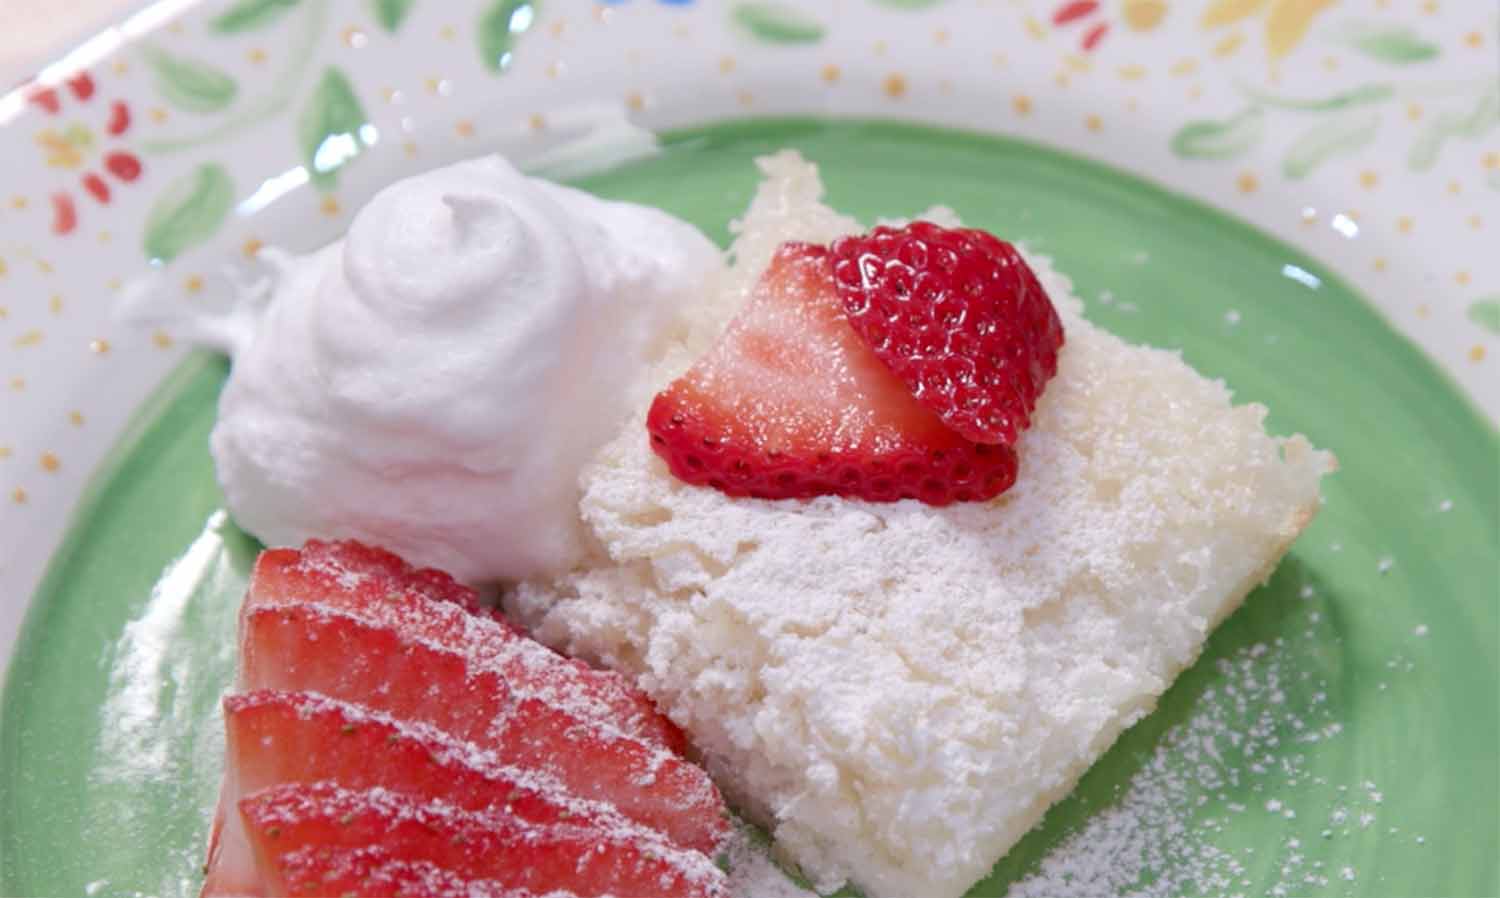 Pineapple angel food cake with sliced strawberries and whipped cream